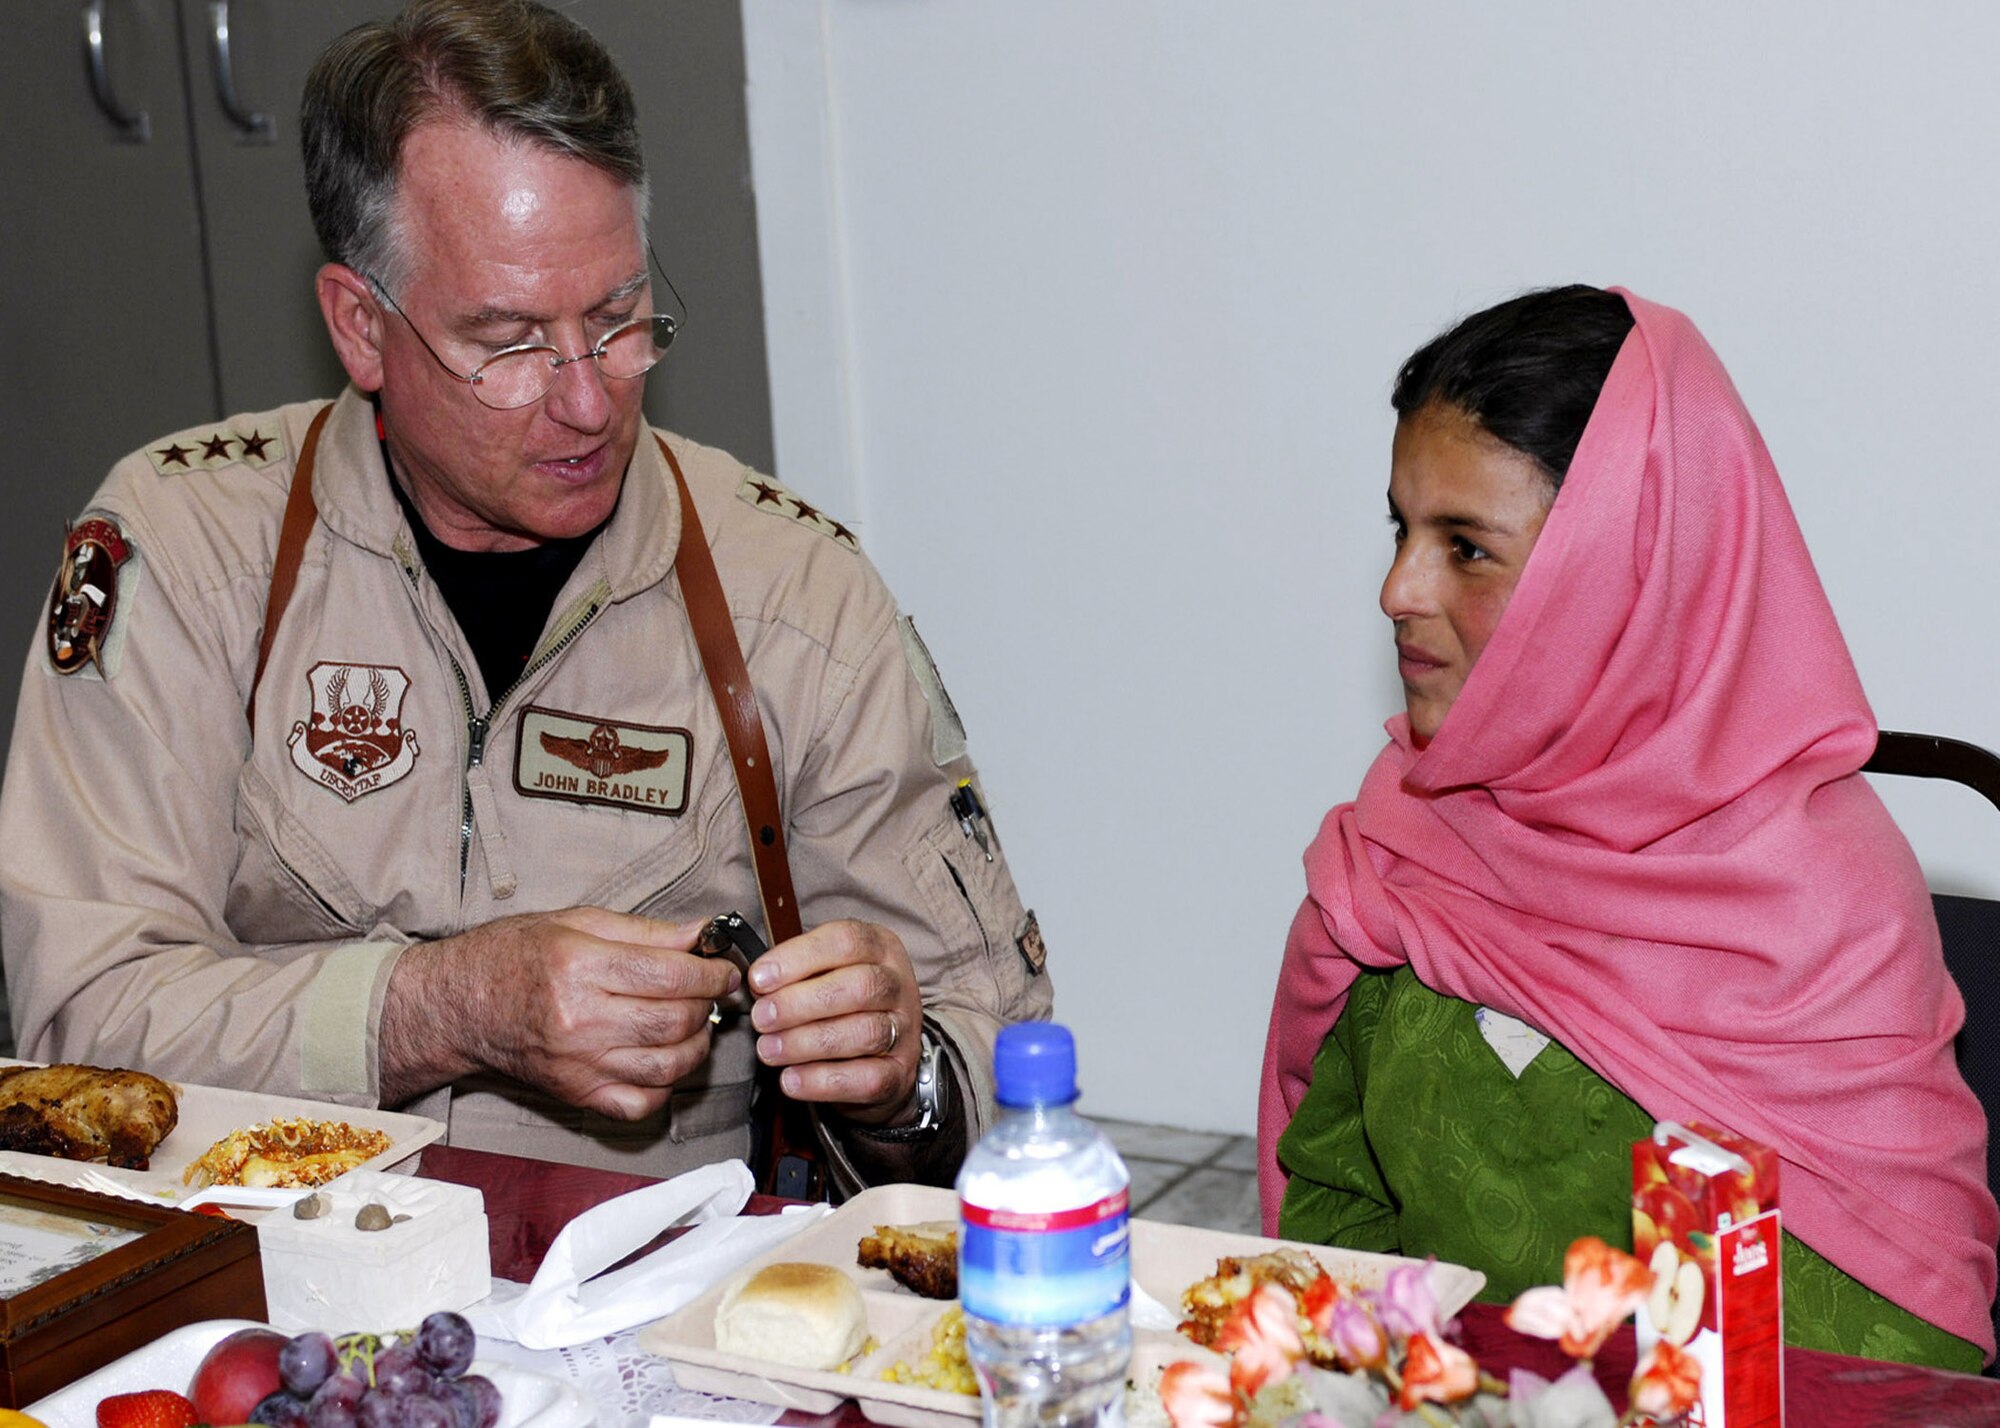 In this meeting in 2008, then Lt. Gen. John Bradley unclasps a watch for Lamia, a 10-year-old Afghan girl he met last winter during a humanitarian aid drop to her village. His wife, Jan, spearheaded a donation drive that collected several boxes of supplies specifically for Lamia and her village of Shakal and were presented May 30.  (U.S. Air Force photo/Capt. Toni Tones)